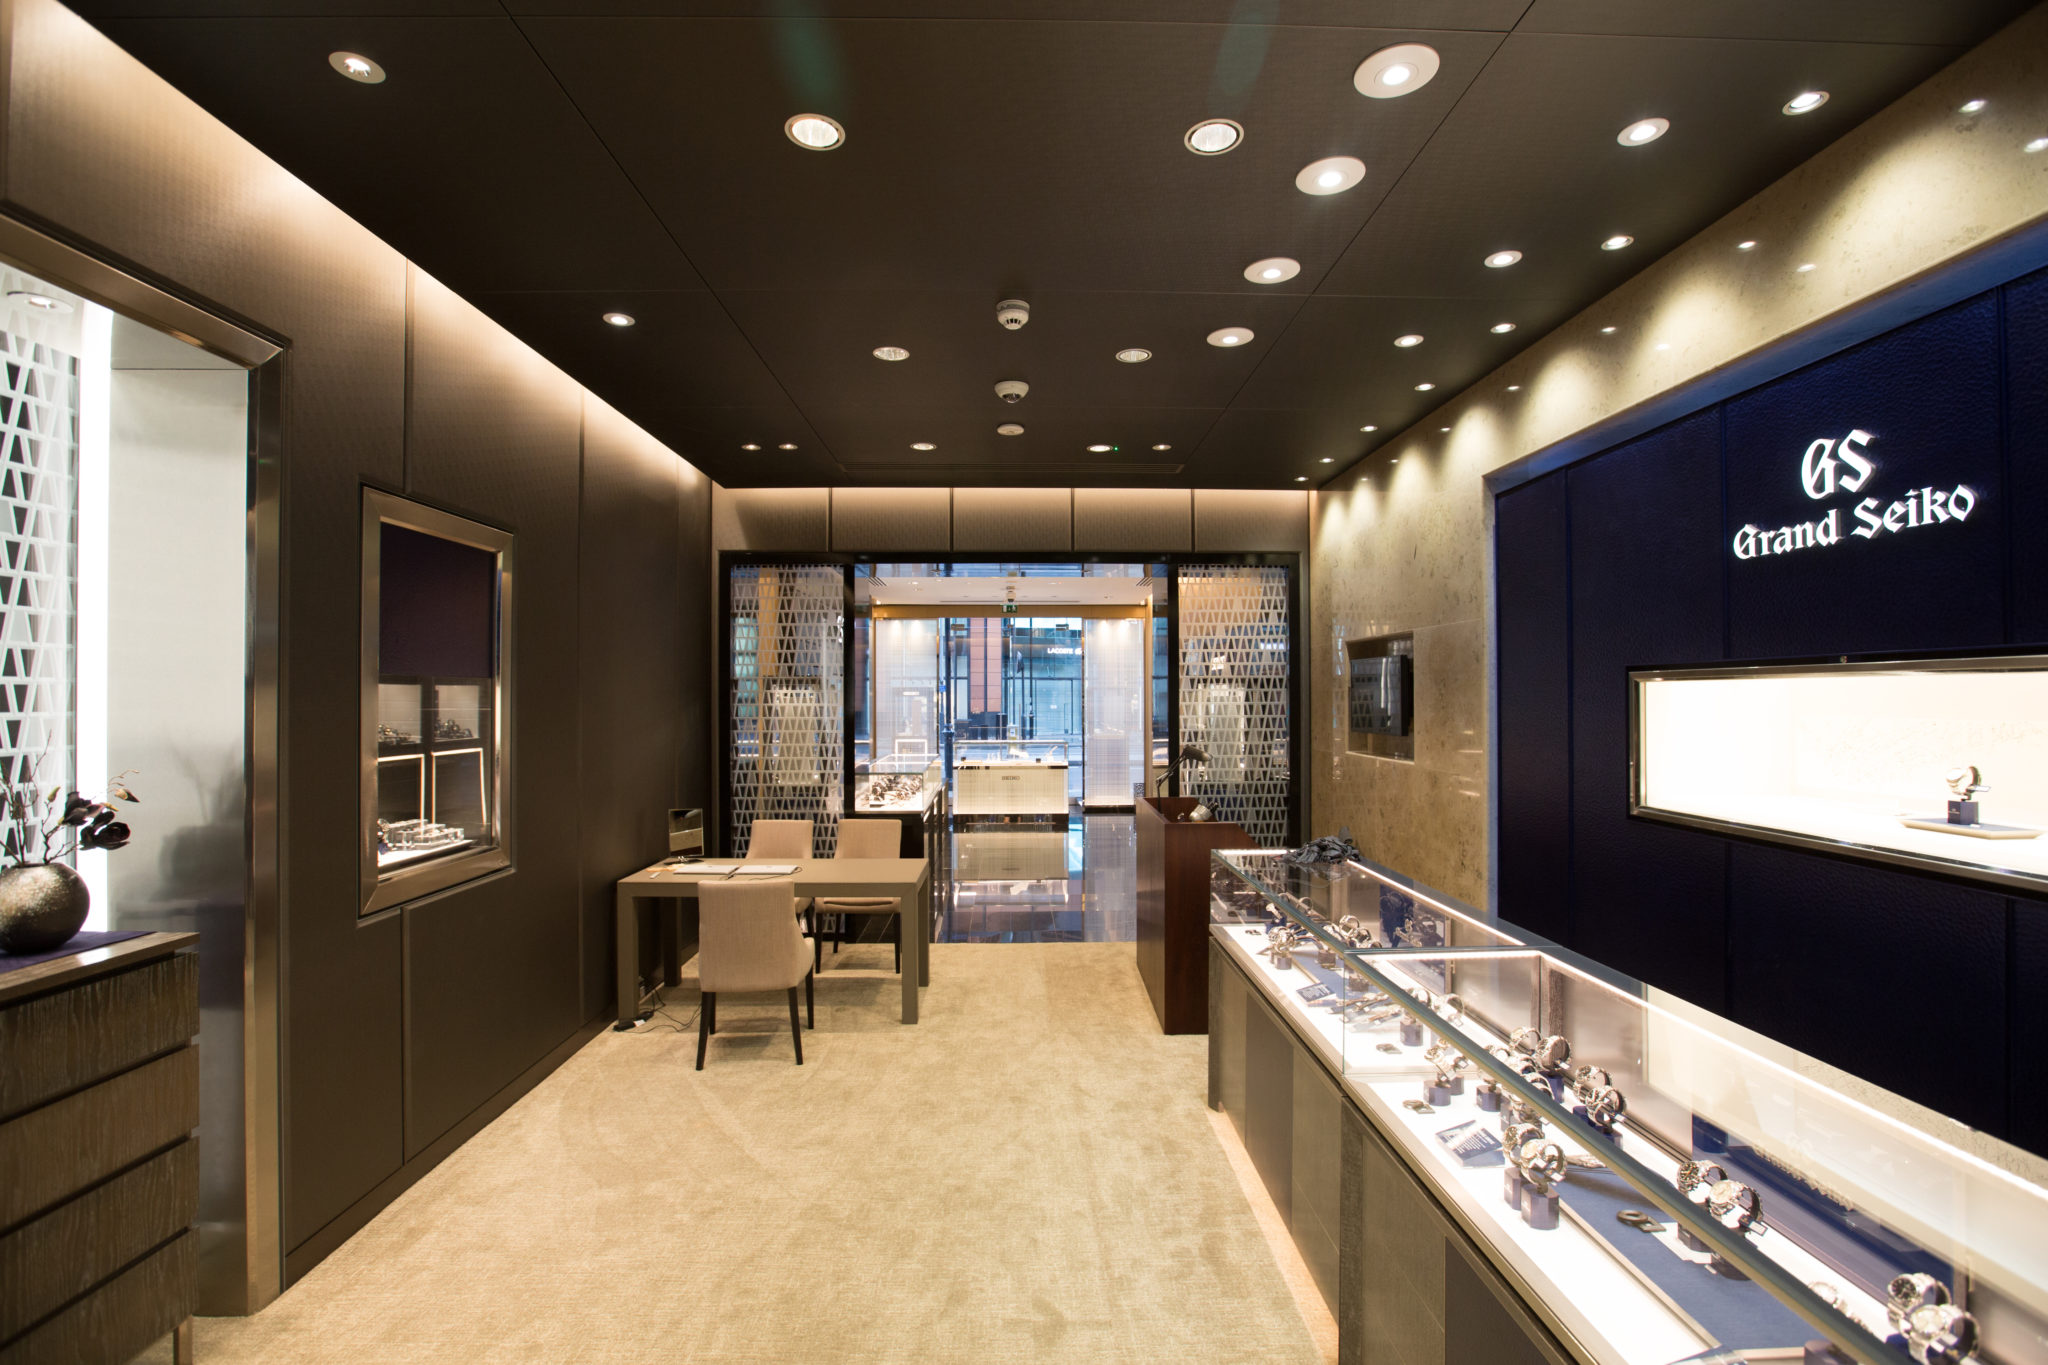 Grand Seiko Secures A Pop-up Boutique Within Harrods' Heathrow Store